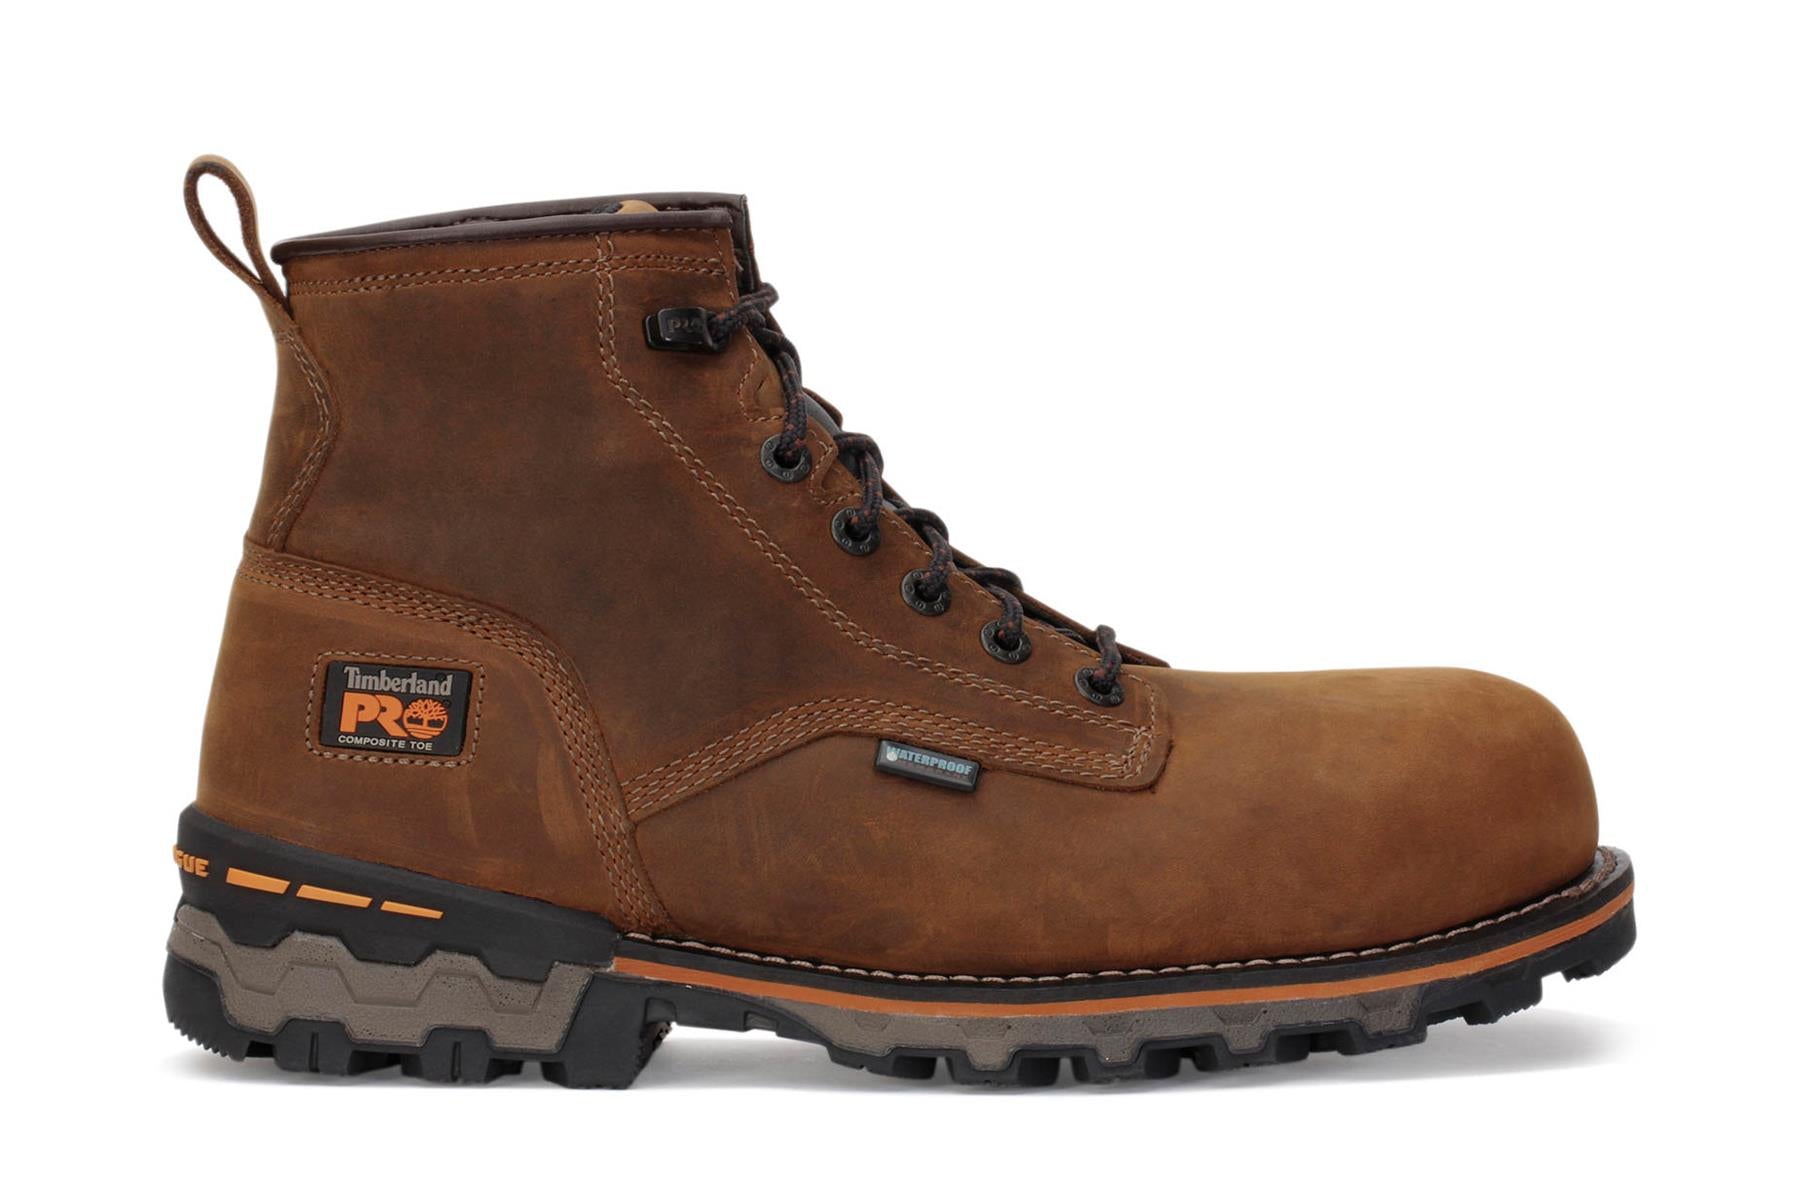 timberland-pro-mens-boondock-6-composite-safety-toe-work-boots-brown-a127g-main